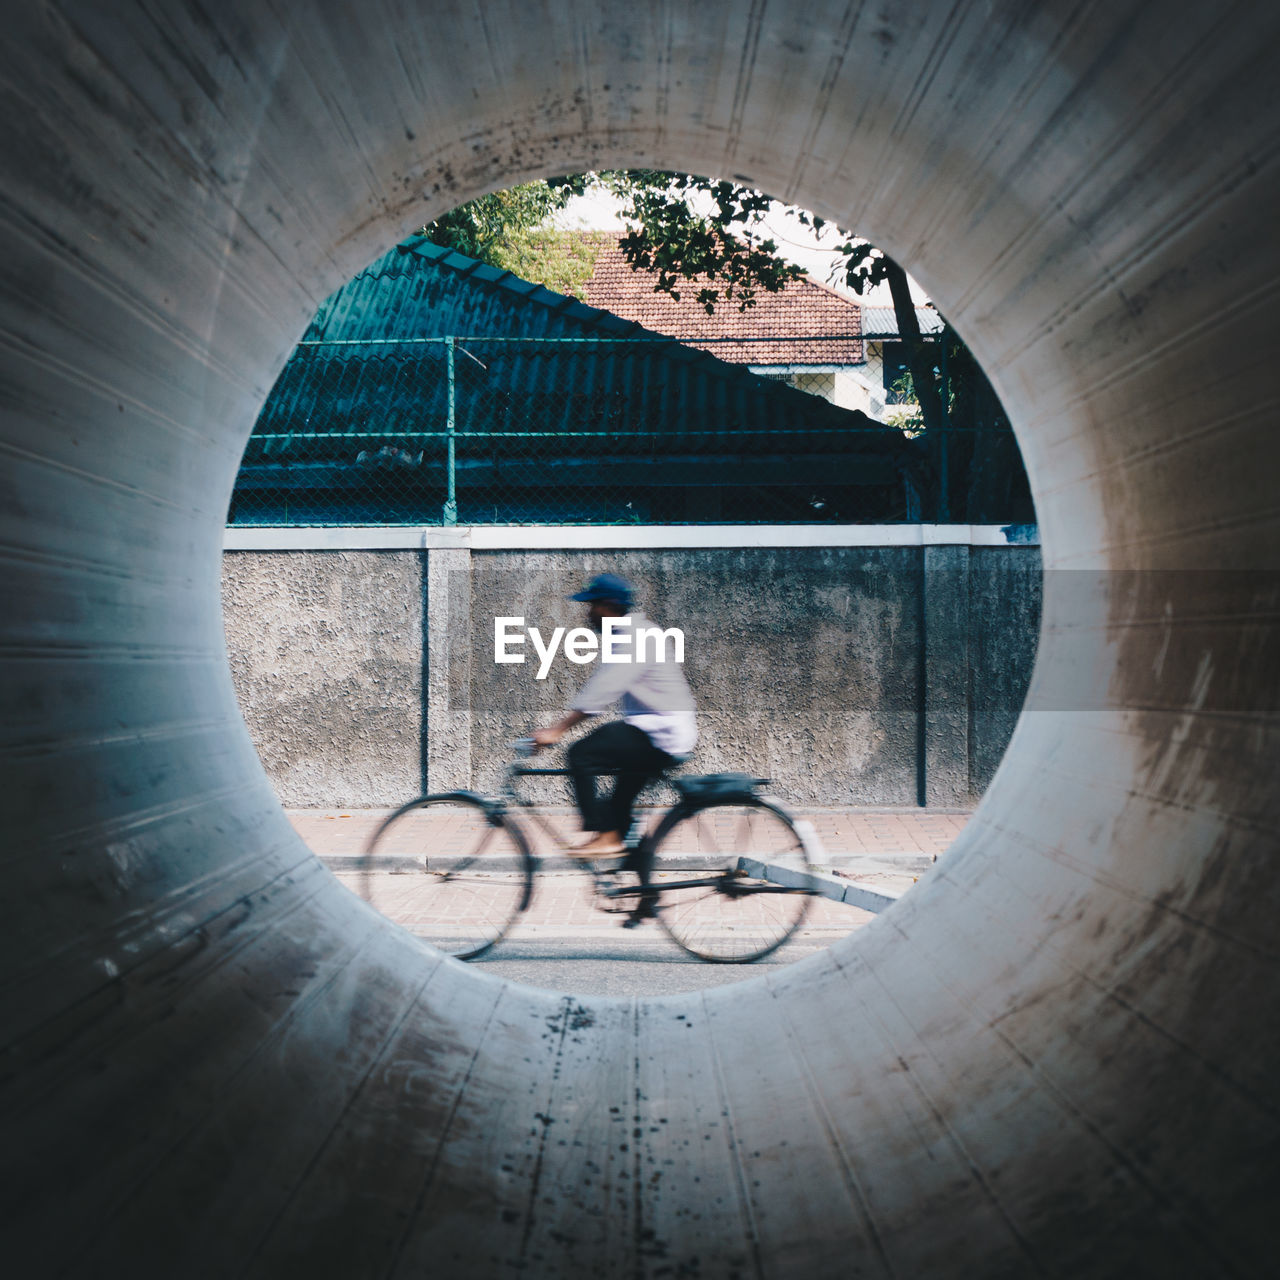 Blurred motion of man riding bicycle seen through concrete pipe hole